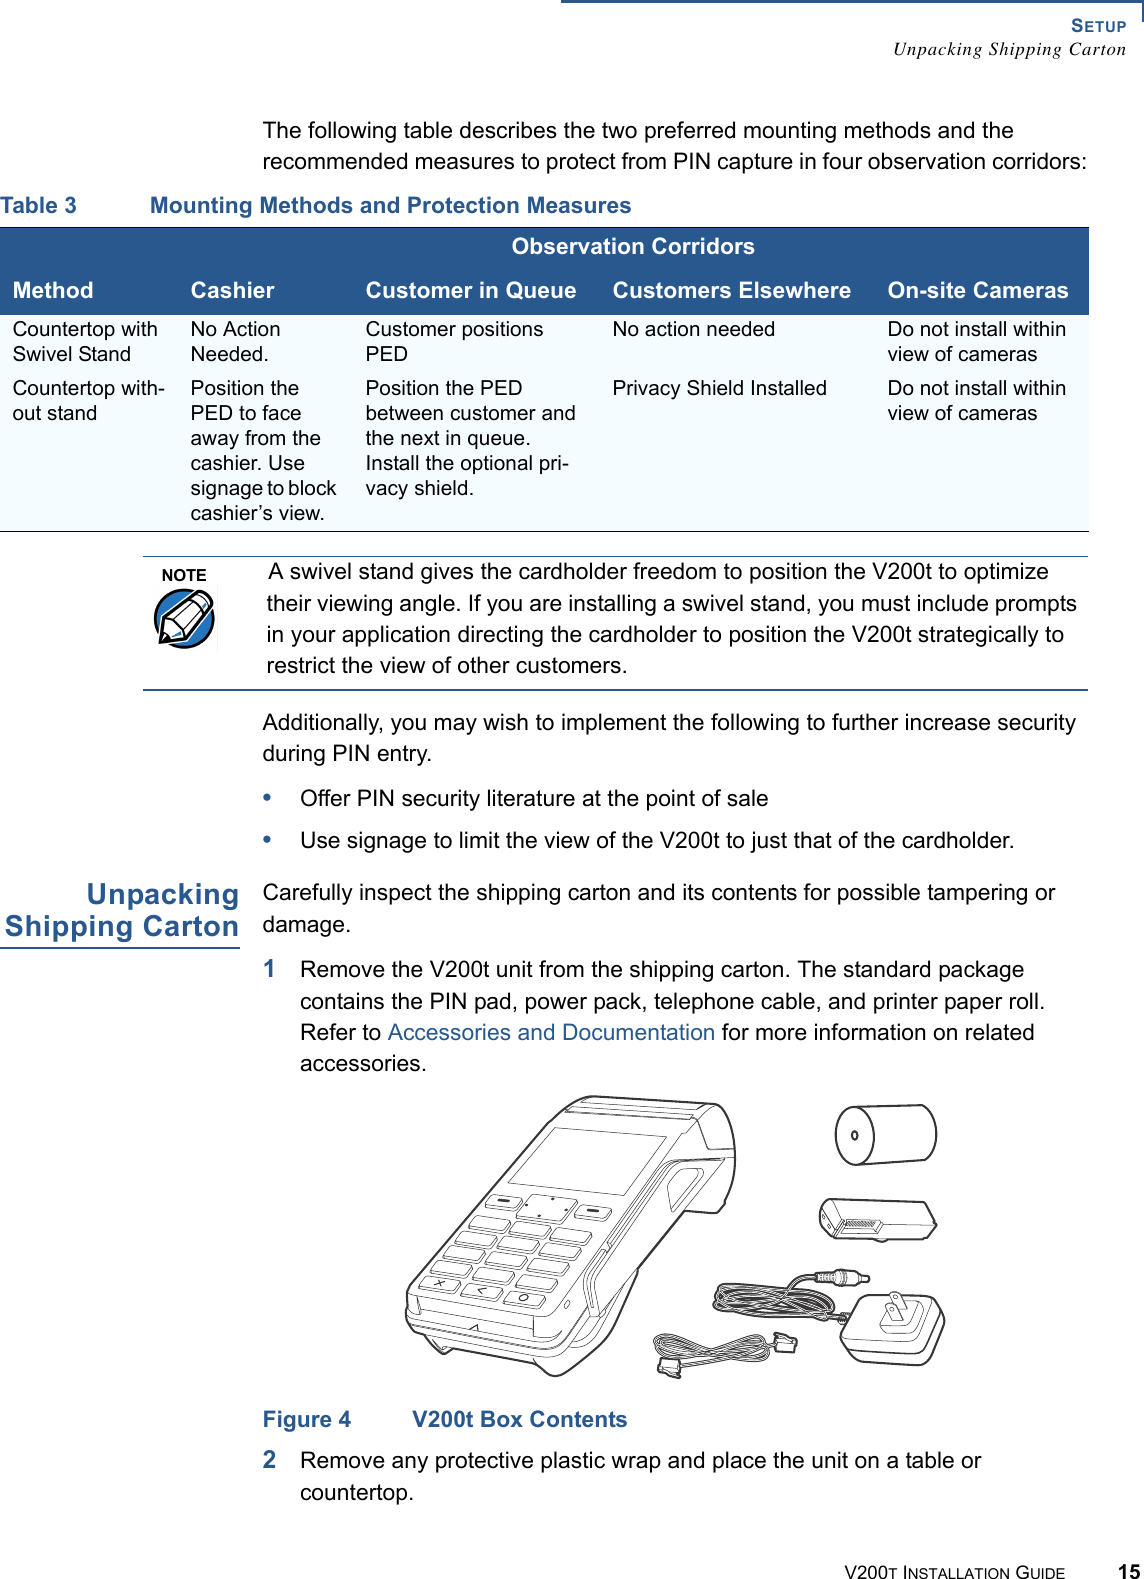 SETUPUnpacking Shipping CartonV200T INSTALLATION GUIDE 15The following table describes the two preferred mounting methods and the recommended measures to protect from PIN capture in four observation corridors:Additionally, you may wish to implement the following to further increase security during PIN entry.•Offer PIN security literature at the point of sale•Use signage to limit the view of the V200t to just that of the cardholder.UnpackingShipping CartonCarefully inspect the shipping carton and its contents for possible tampering or damage.1Remove the V200t unit from the shipping carton. The standard package contains the PIN pad, power pack, telephone cable, and printer paper roll. Refer to Accessories and Documentation for more information on related accessories.Figure 4 V200t Box Contents2Remove any protective plastic wrap and place the unit on a table or countertop.Table 3 Mounting Methods and Protection MeasuresObservation CorridorsMethod Cashier Customer in Queue Customers Elsewhere On-site CamerasCountertop with Swivel StandNo Action Needed.Customer positions PEDNo action needed Do not install within view of camerasCountertop with-out standPosition the PED to face away from the cashier. Use signage to block cashier’s view.Position the PED between customer and the next in queue. Install the optional pri-vacy shield.Privacy Shield Installed Do not install within view of camerasNOTEA swivel stand gives the cardholder freedom to position the V200t to optimize their viewing angle. If you are installing a swivel stand, you must include prompts in your application directing the cardholder to position the V200t strategically to restrict the view of other customers.